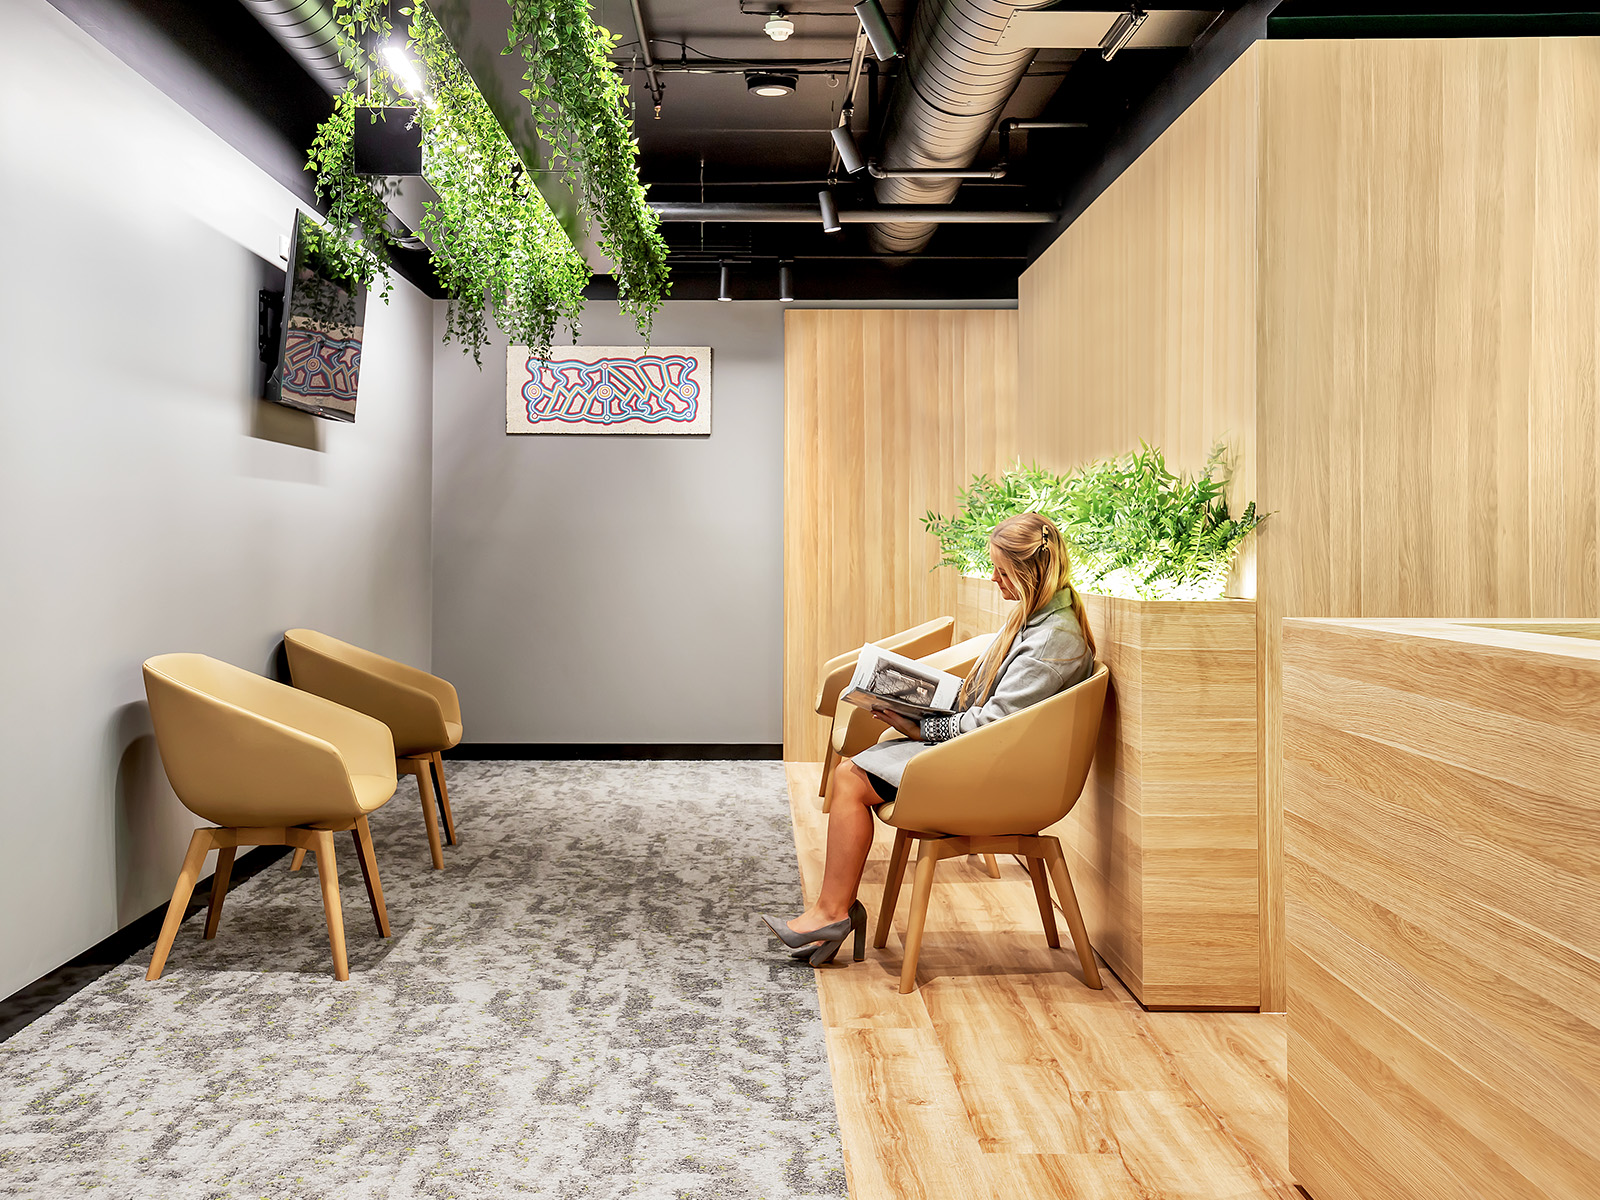 Green Radiology | waiting room fitout | Eagleheart